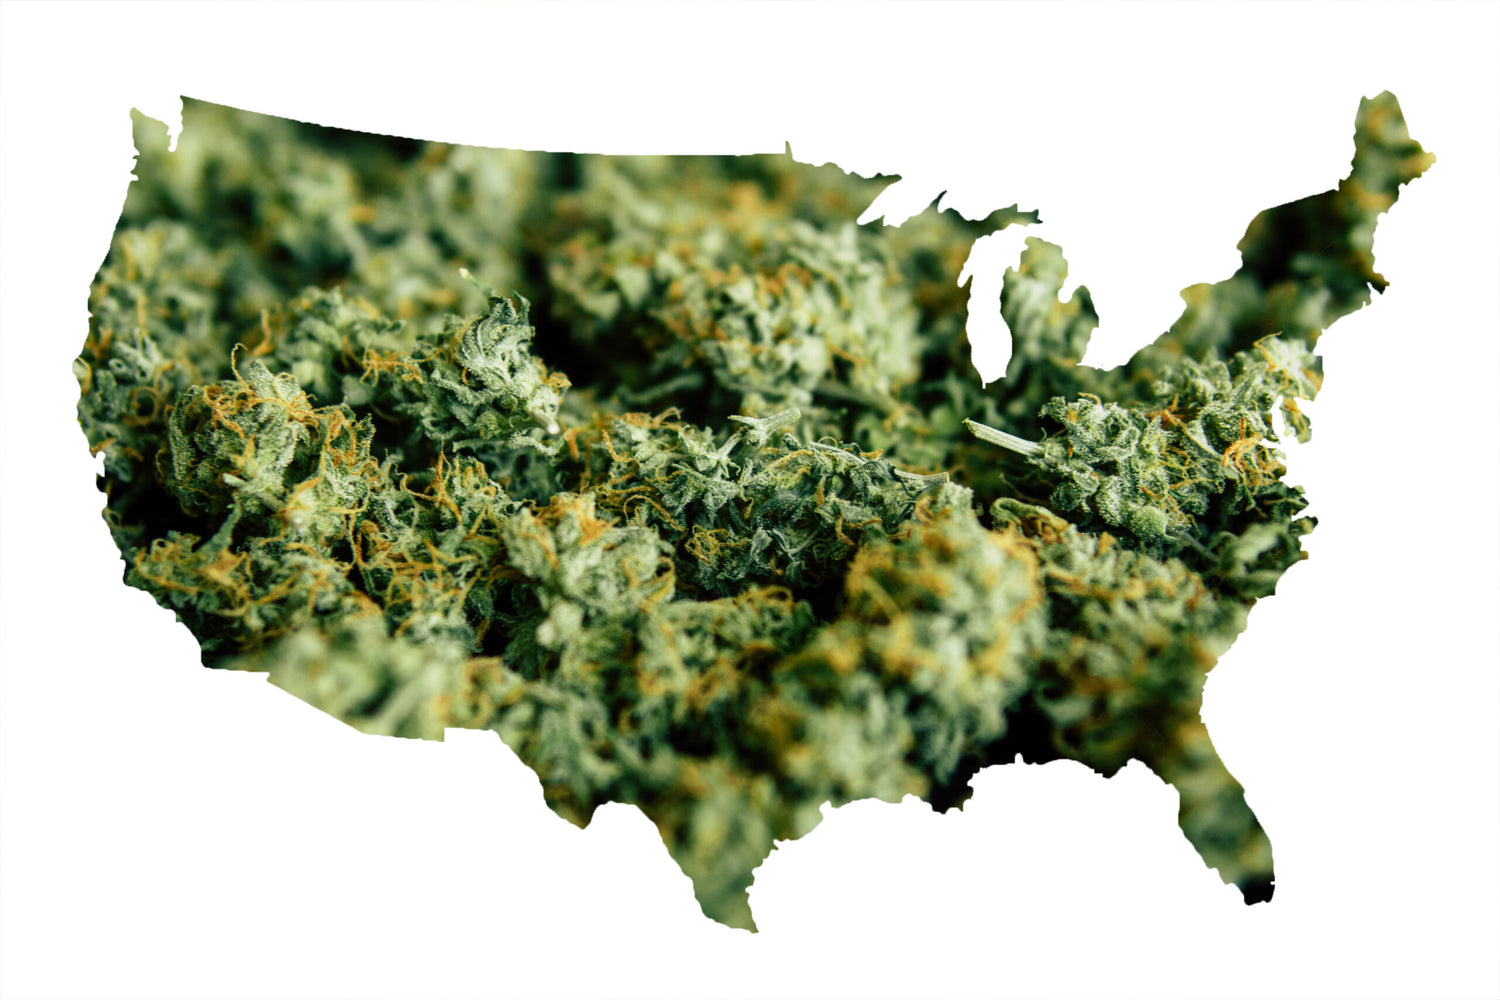 If These Four States Legalize Cannabis, Federal Legalization Could Follow